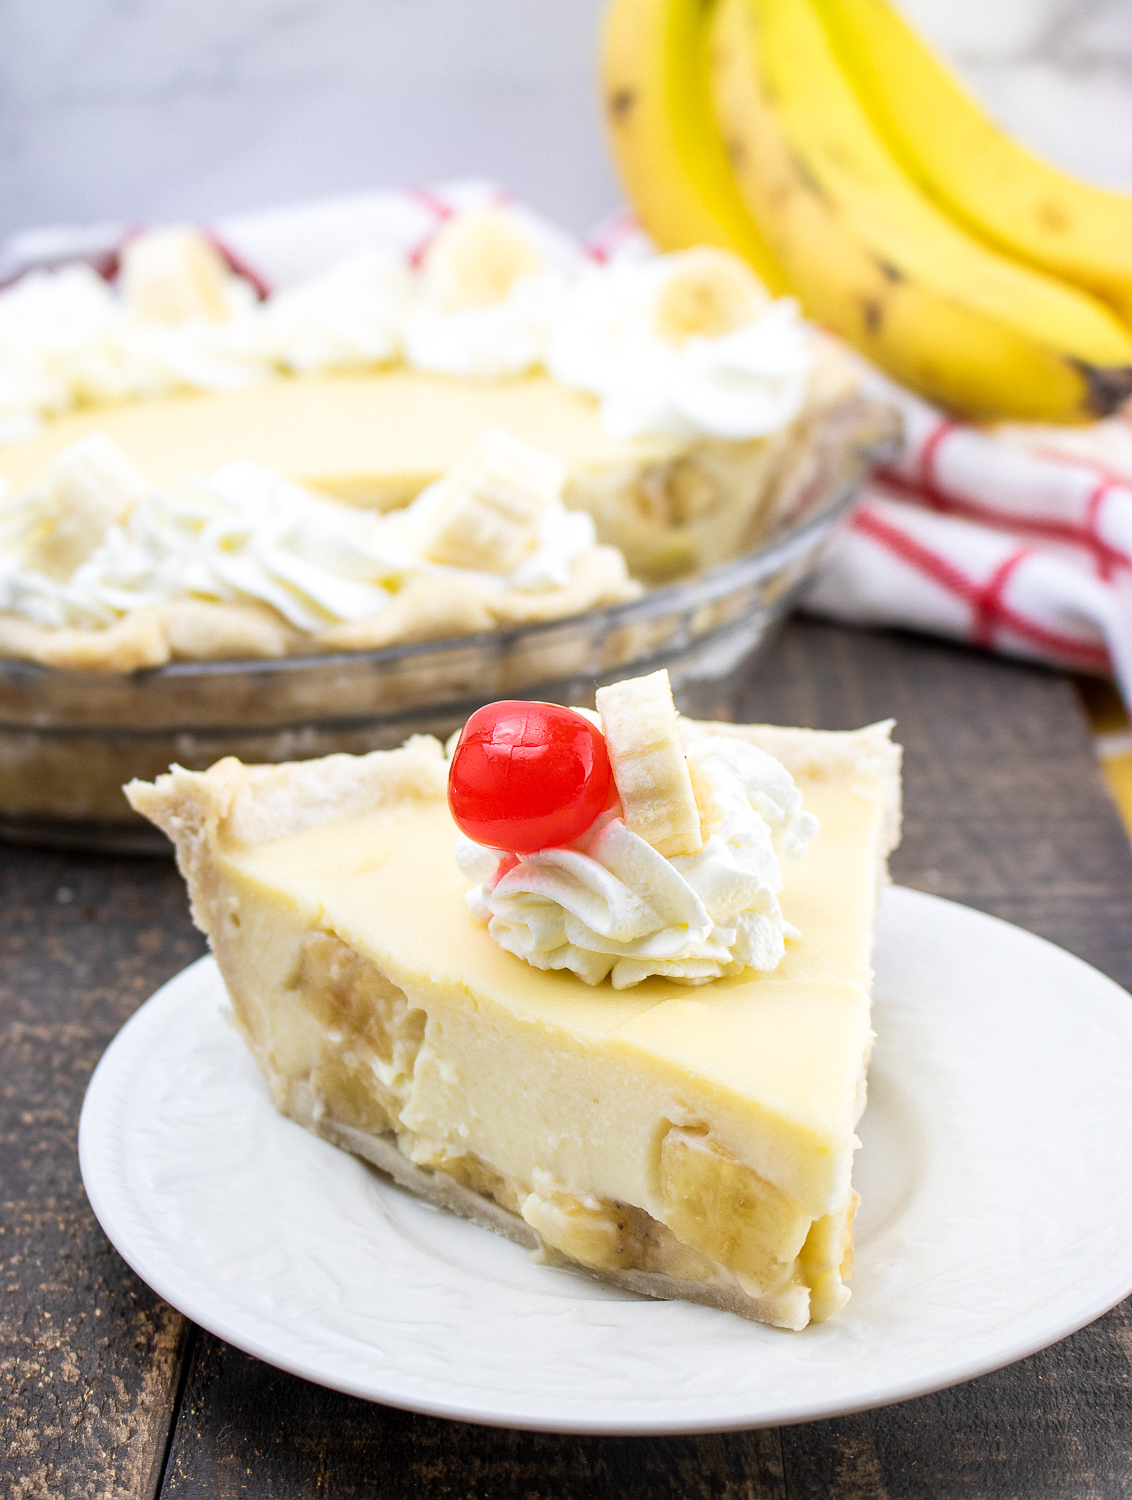 Banana Cream Pie with a cherry on top.